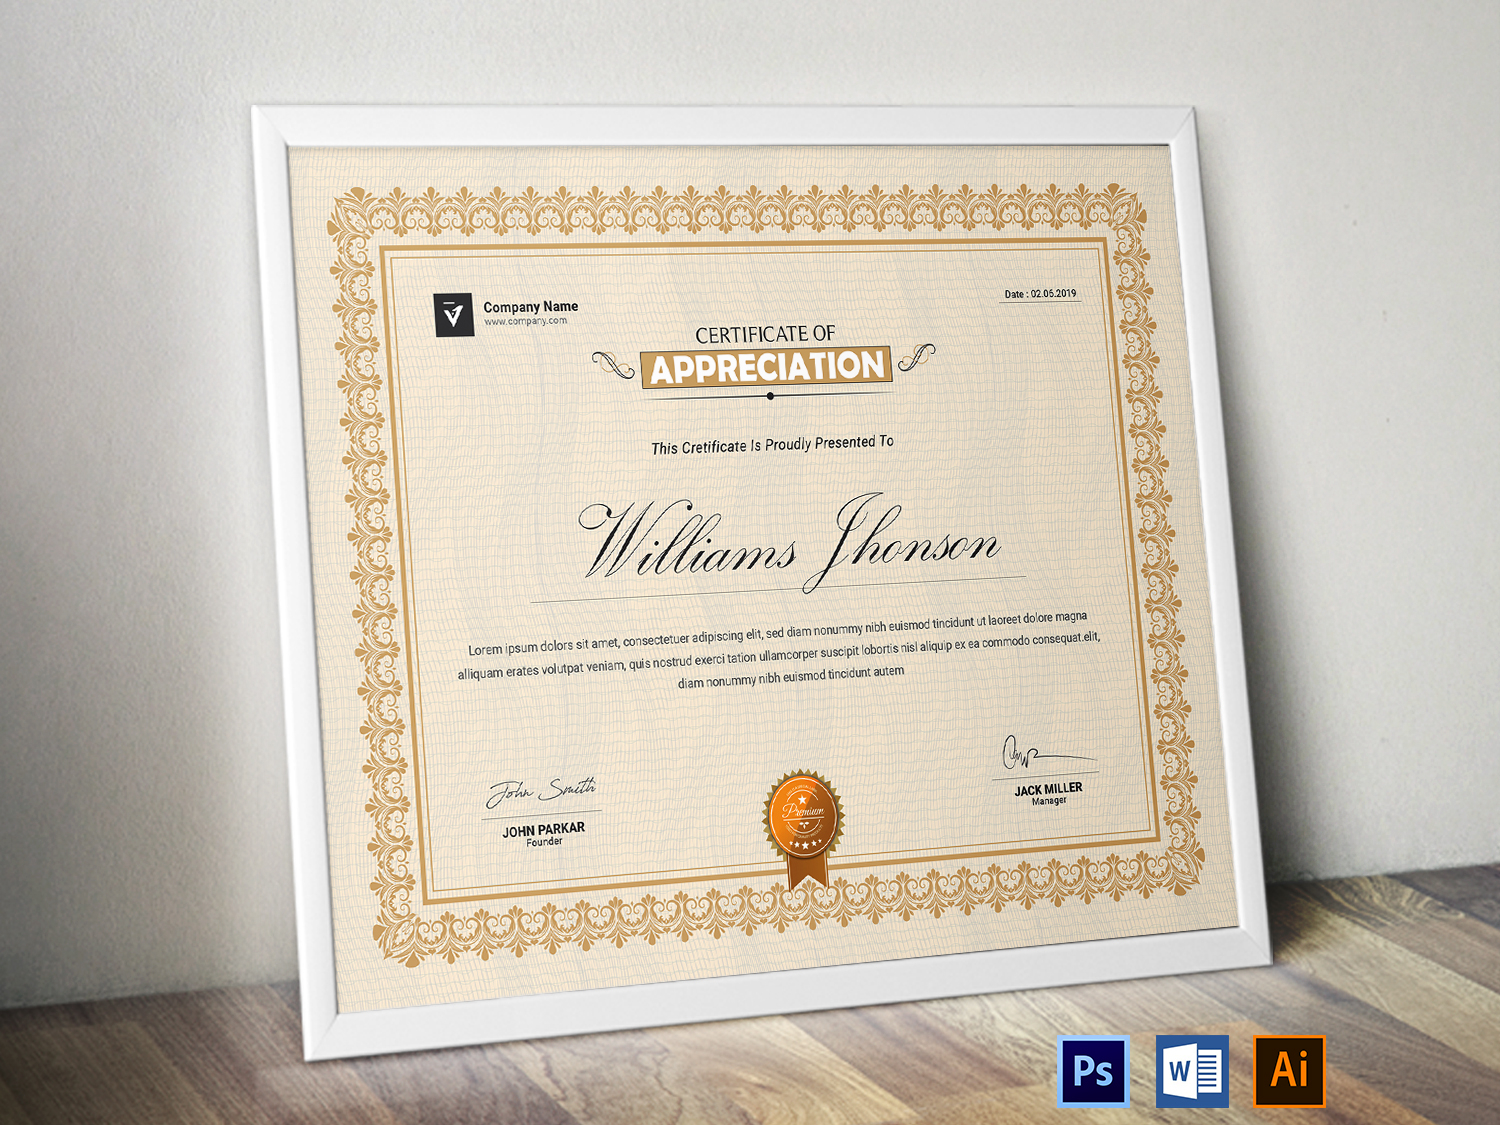 Certificate Template | Certificate Design by Classic Designp on Dribbble